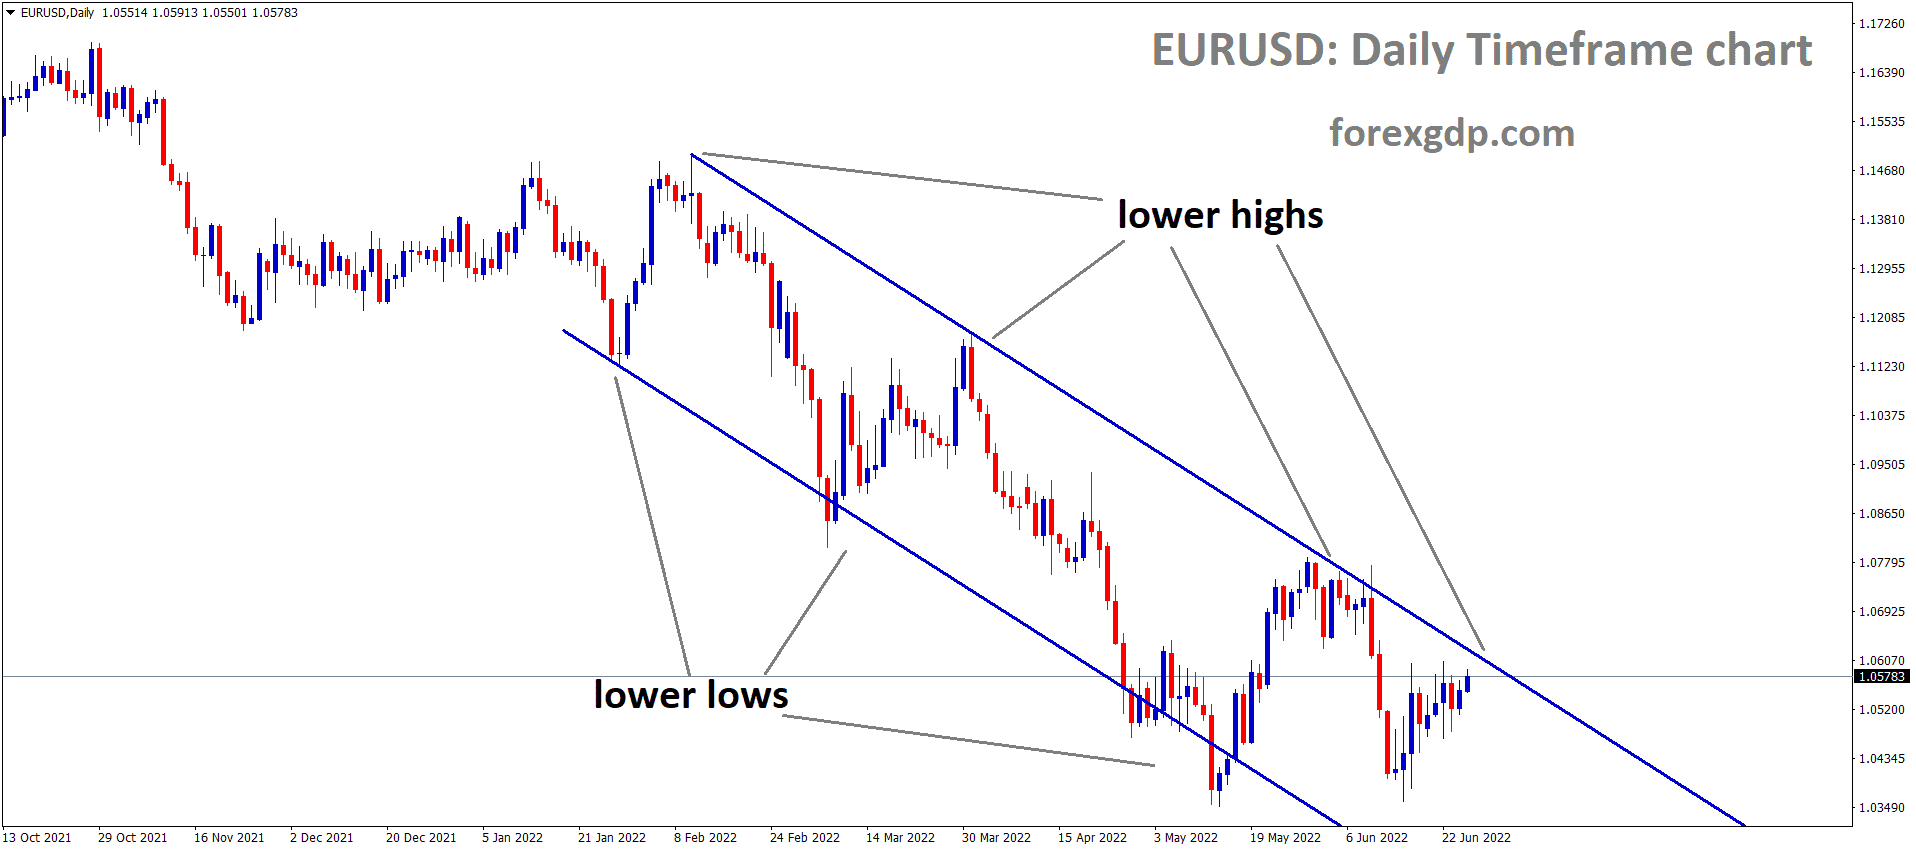 EURUSD is moving in the Descending channel and the Market has reached the Lower high area of the channel